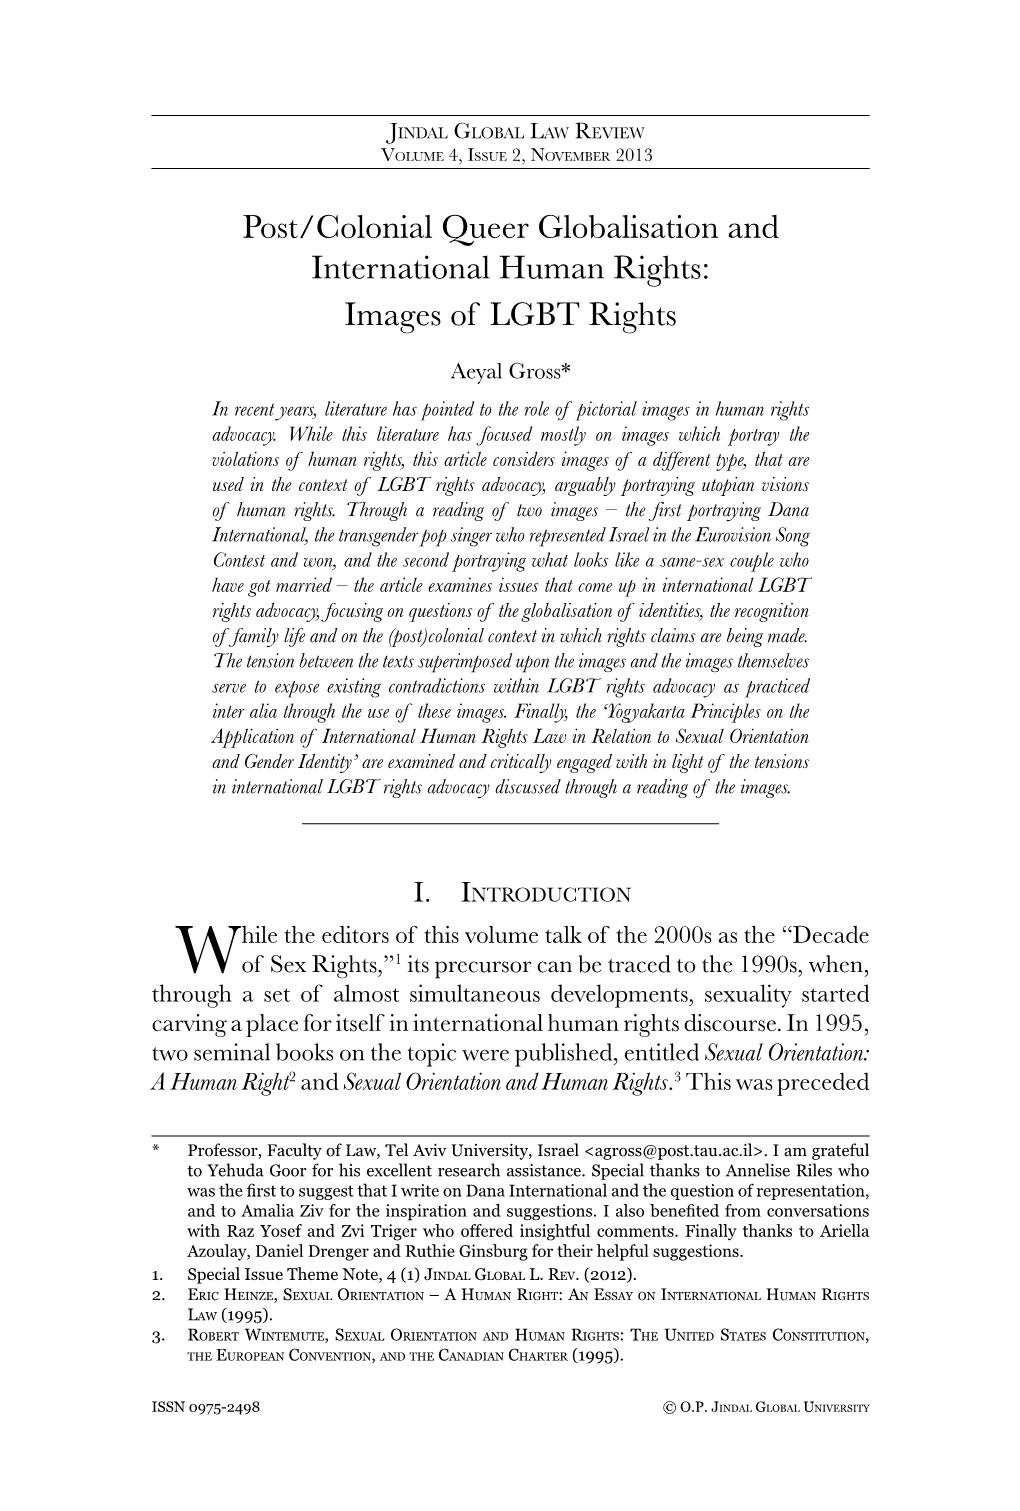 Post/Colonial Queer Globalisation and International Human Rights: Images of LGBT Rights